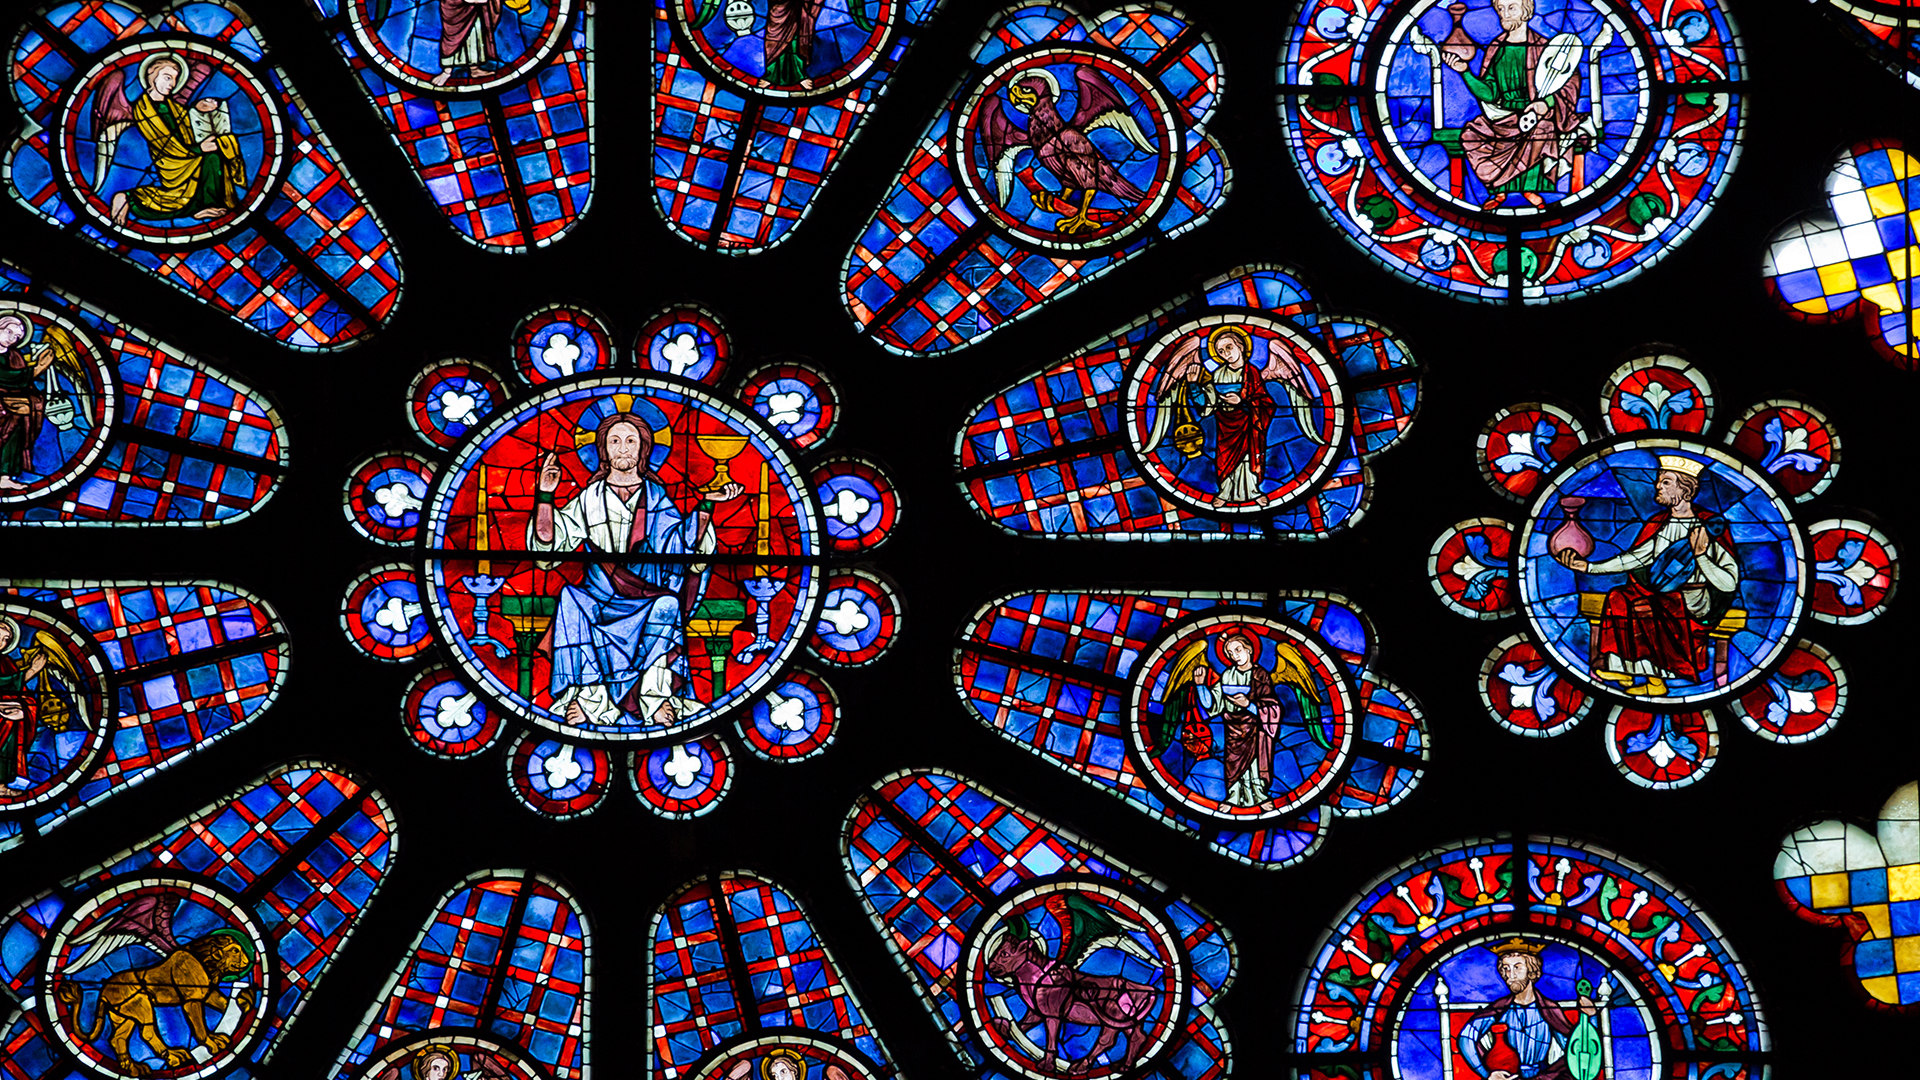 South Rose window (12th century), Chartres Cathedral, Chartres, France. Photo: Rick Steves’ Europe.